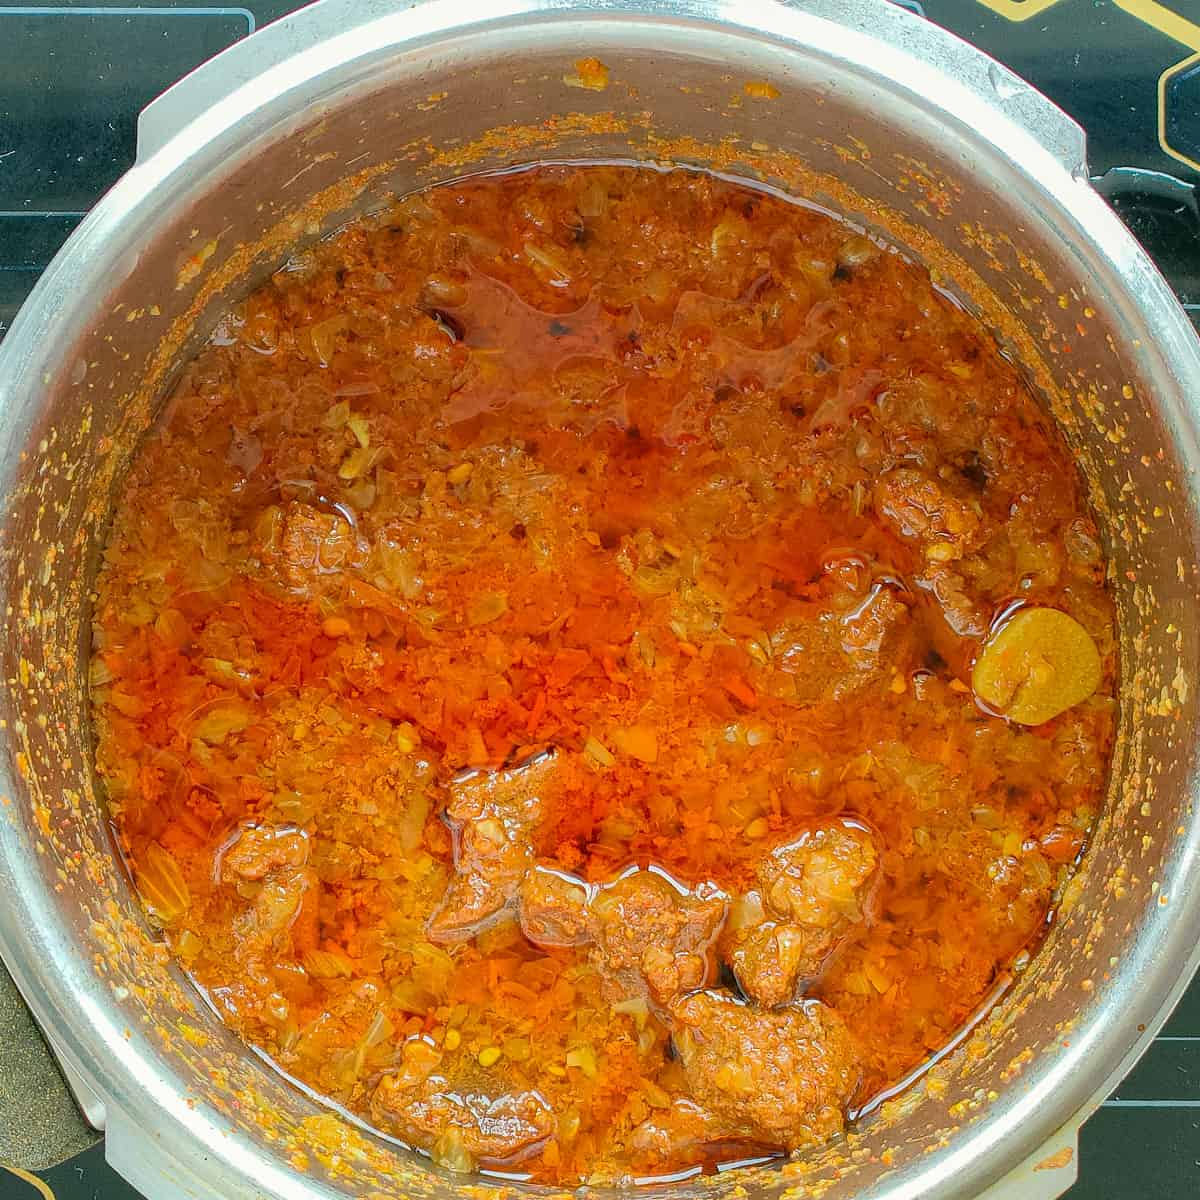 Cooked mutton gravy in a pressure cooker.